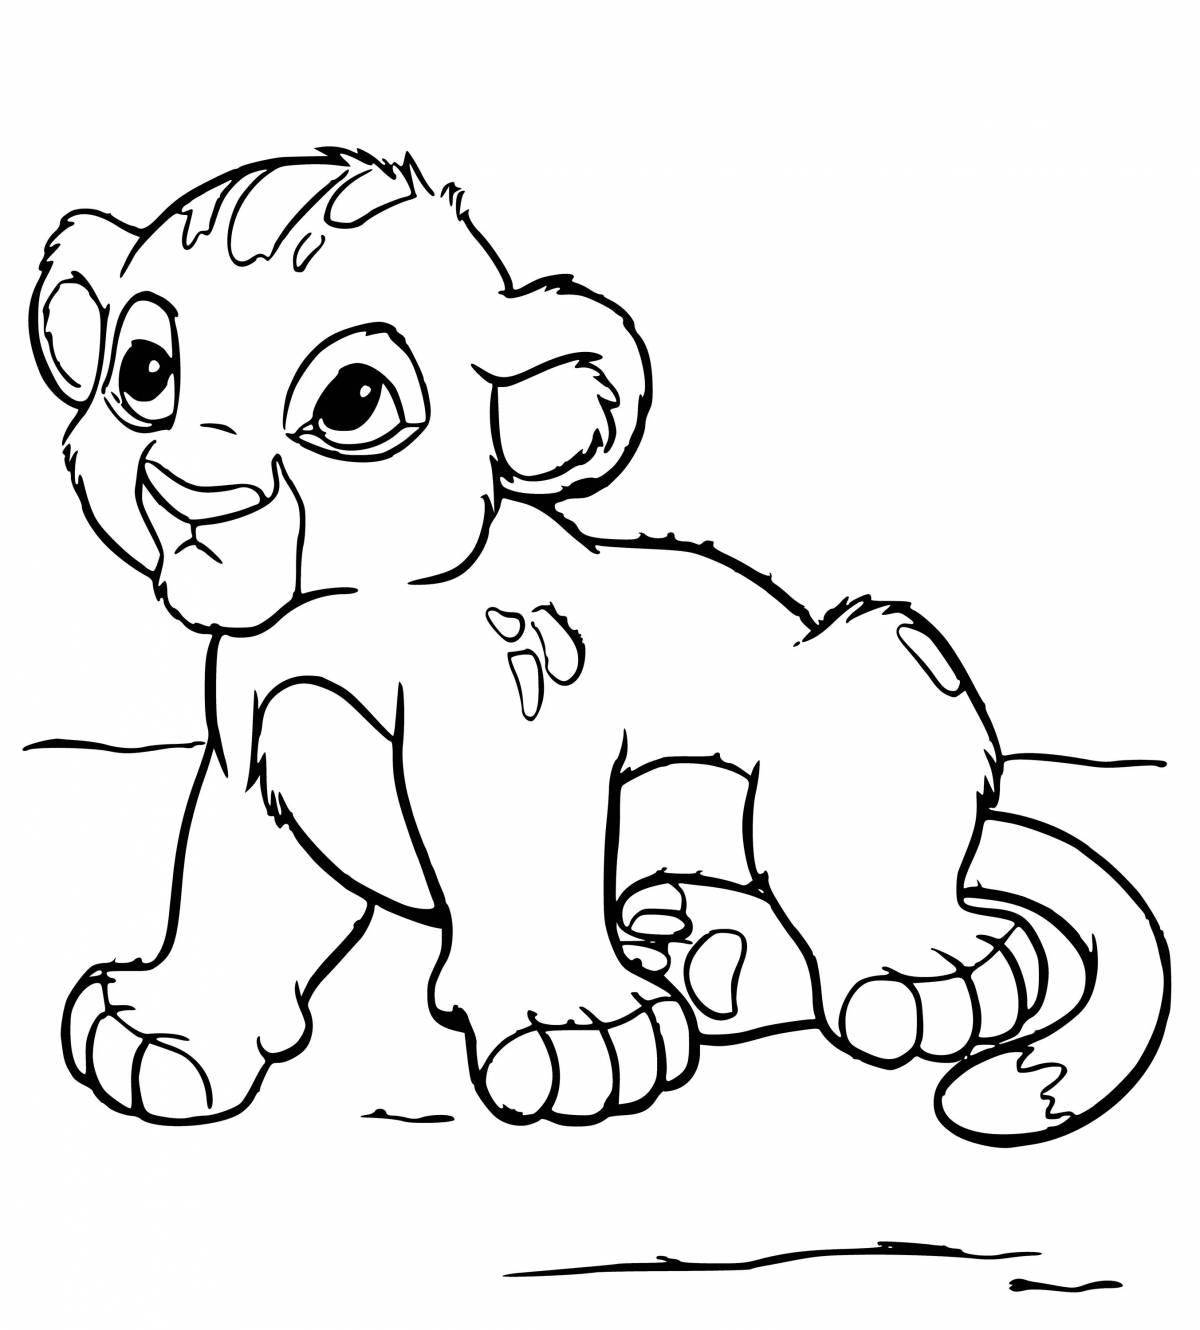 Radiant lion king coloring page for kids